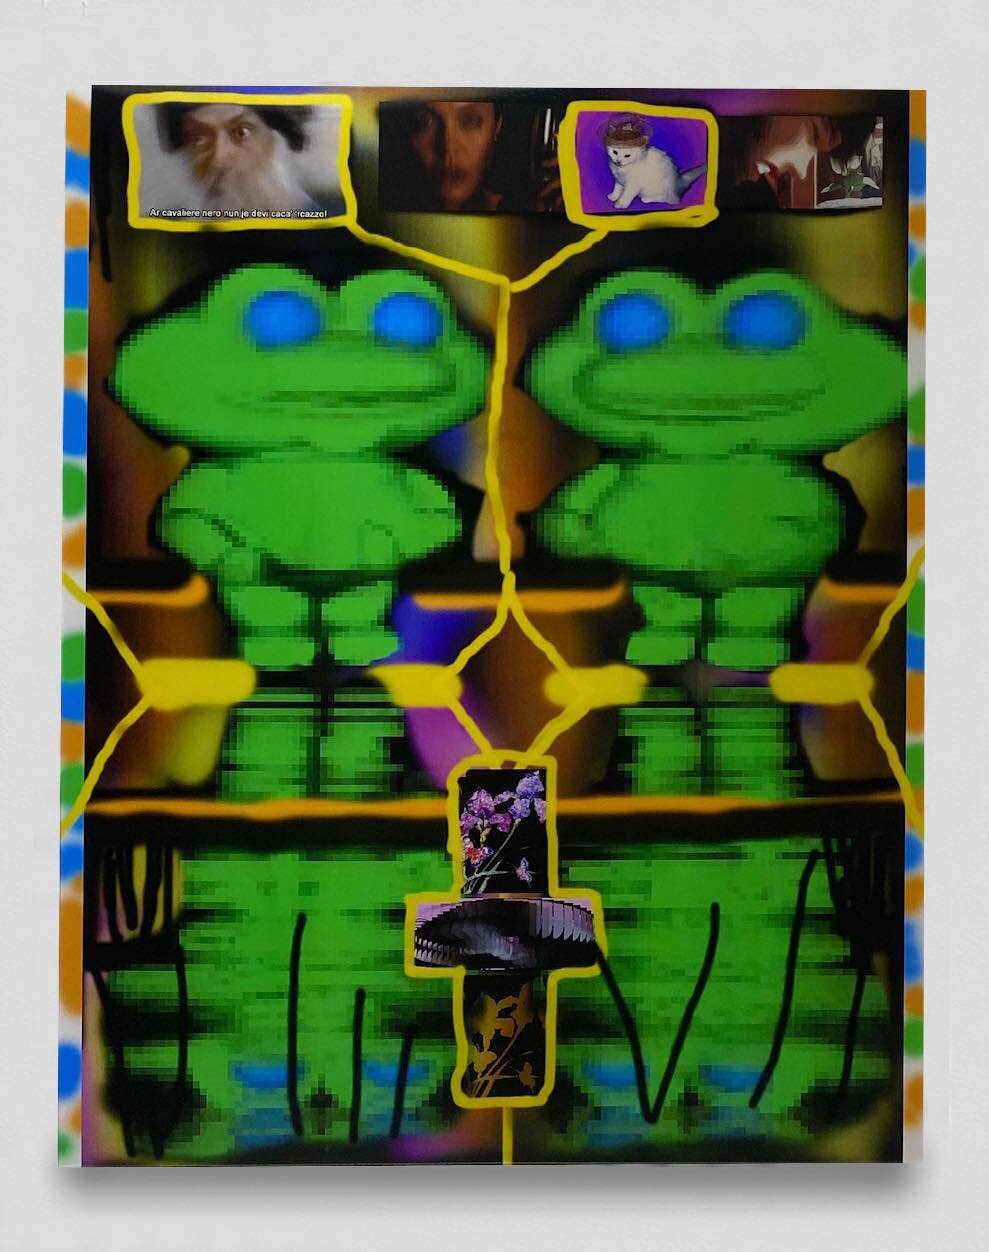     JARED HOFFMAN    Wet Brains Love Christ , 2020  Lenticular on Panel  16 x 20 x 1 inches   info@goodnakedgallery.com    